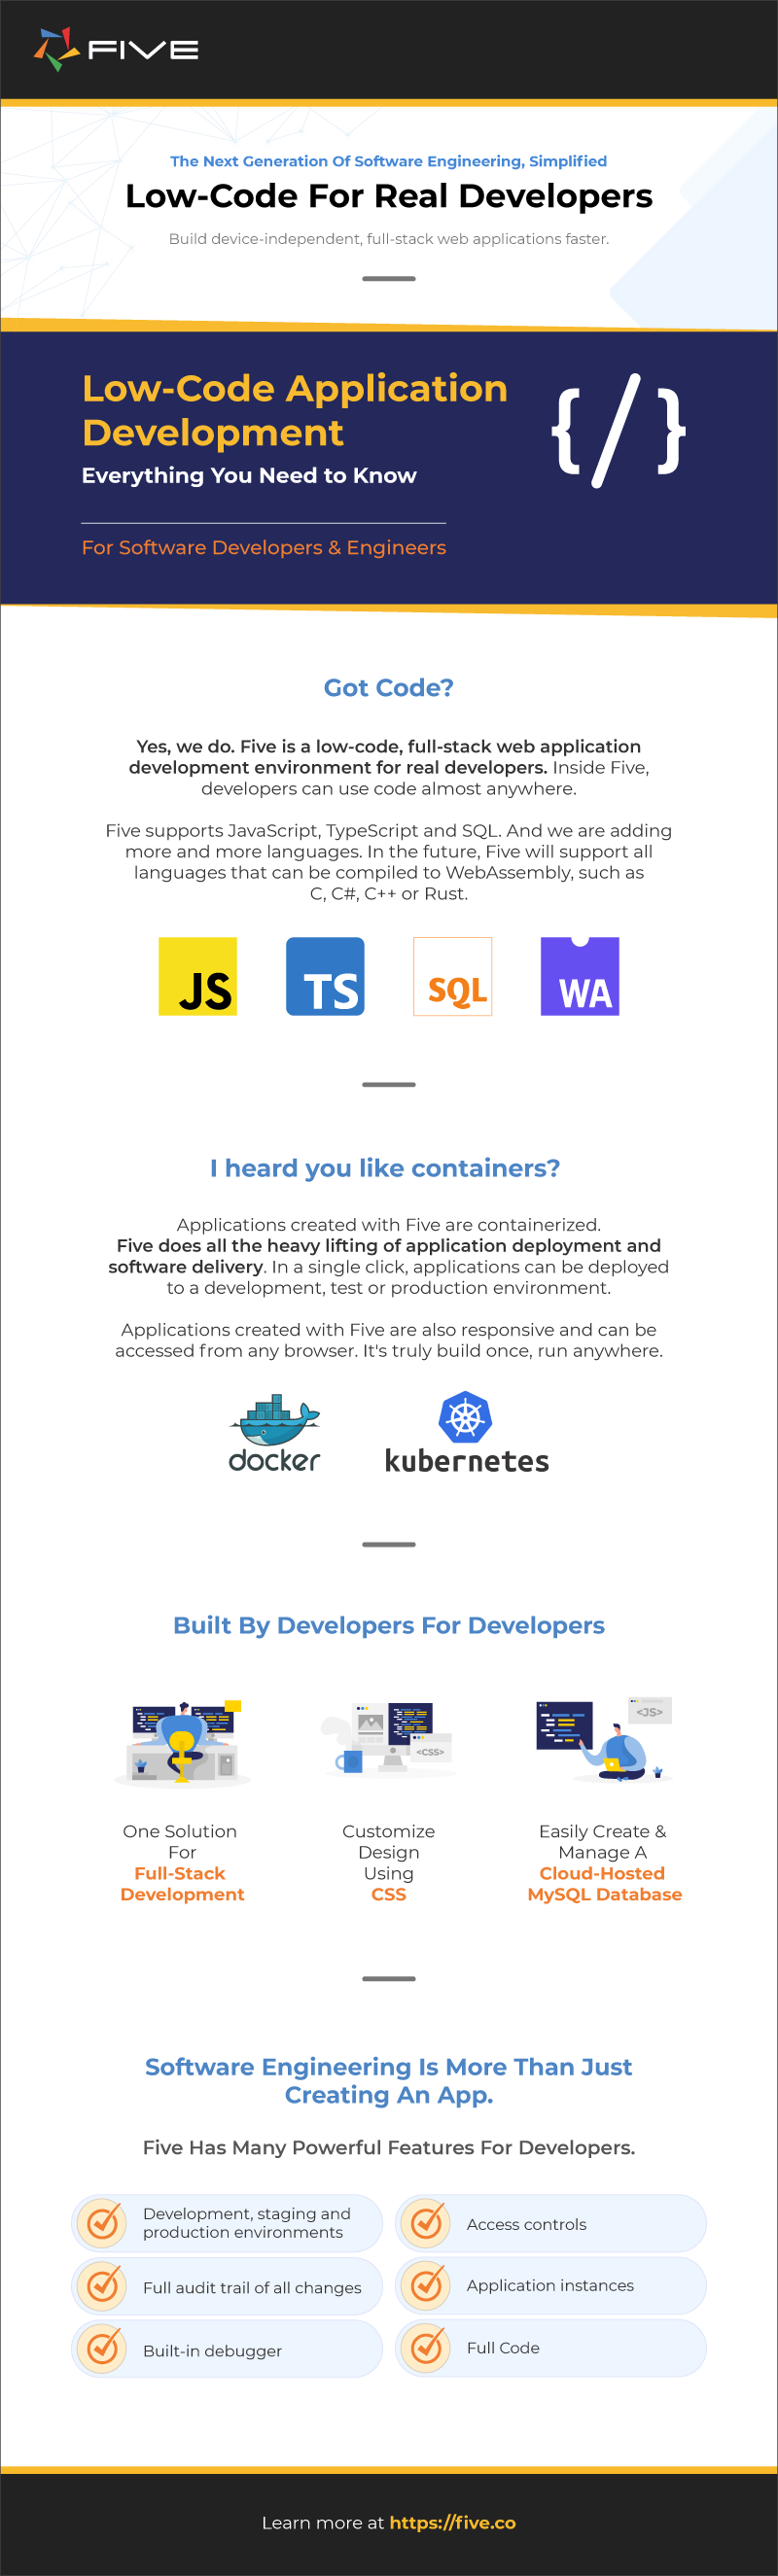 five.co - Infographic - Developers